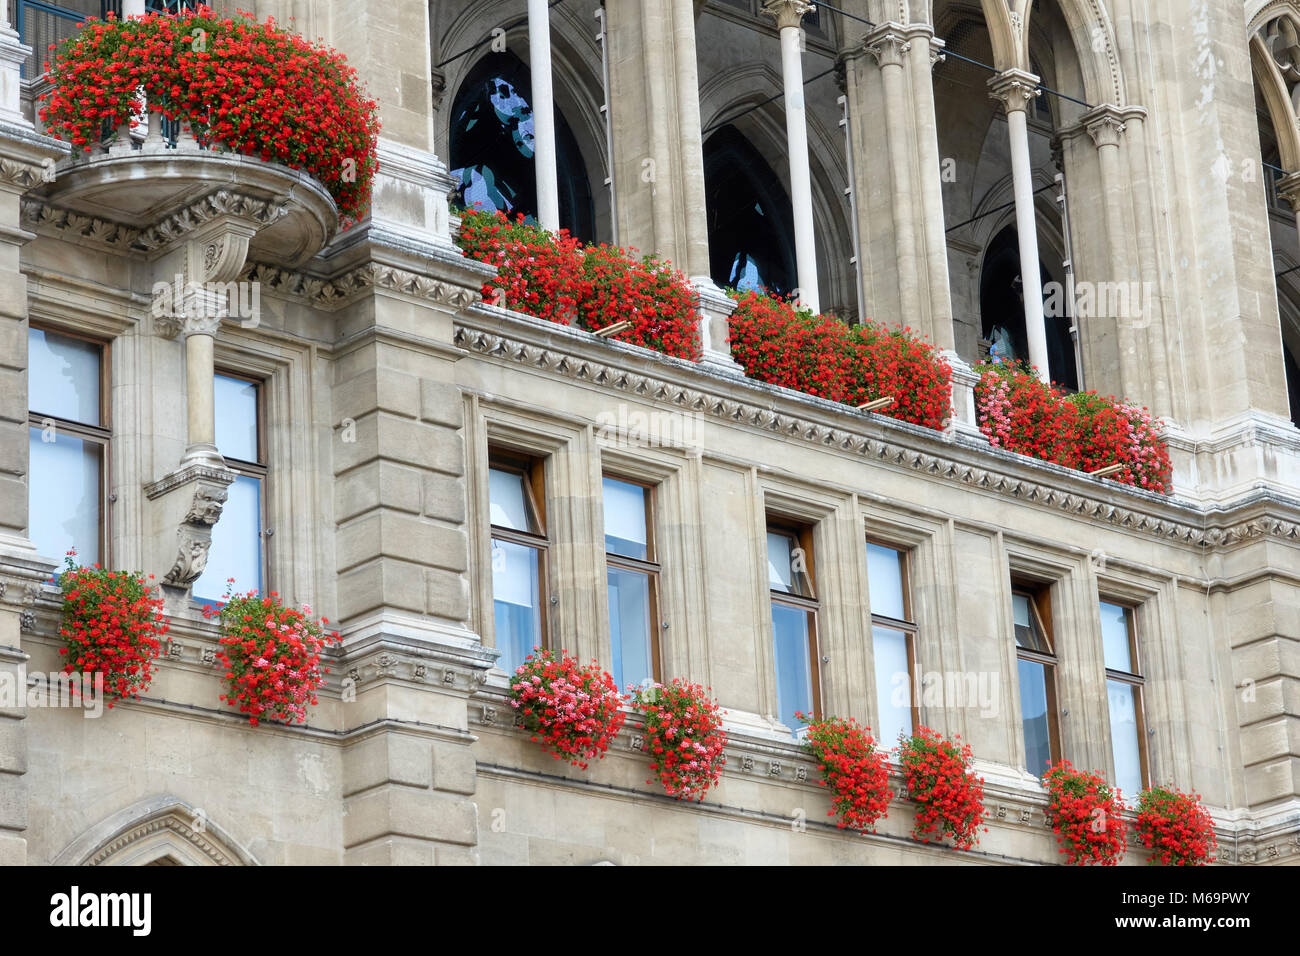 Windows in the ancient architecture of buildings are decorated with flowers. Stock Photo